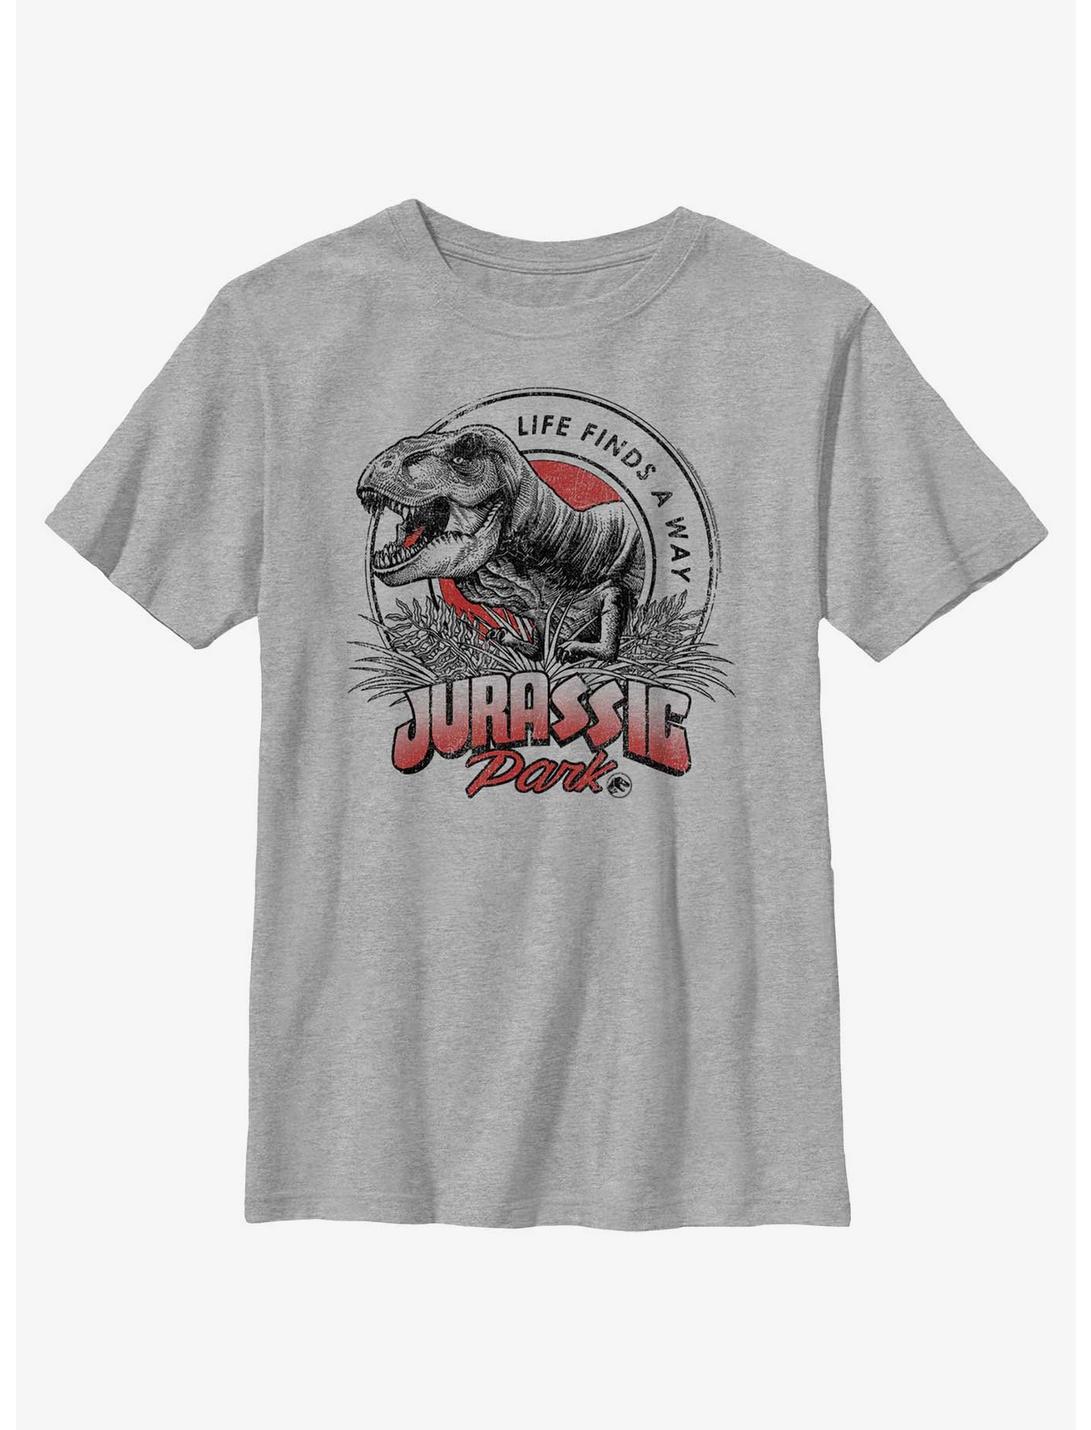 Plus Size Jurassic Park Life Finds A Way Youth T-Shirt, ATH HTR, hi-res